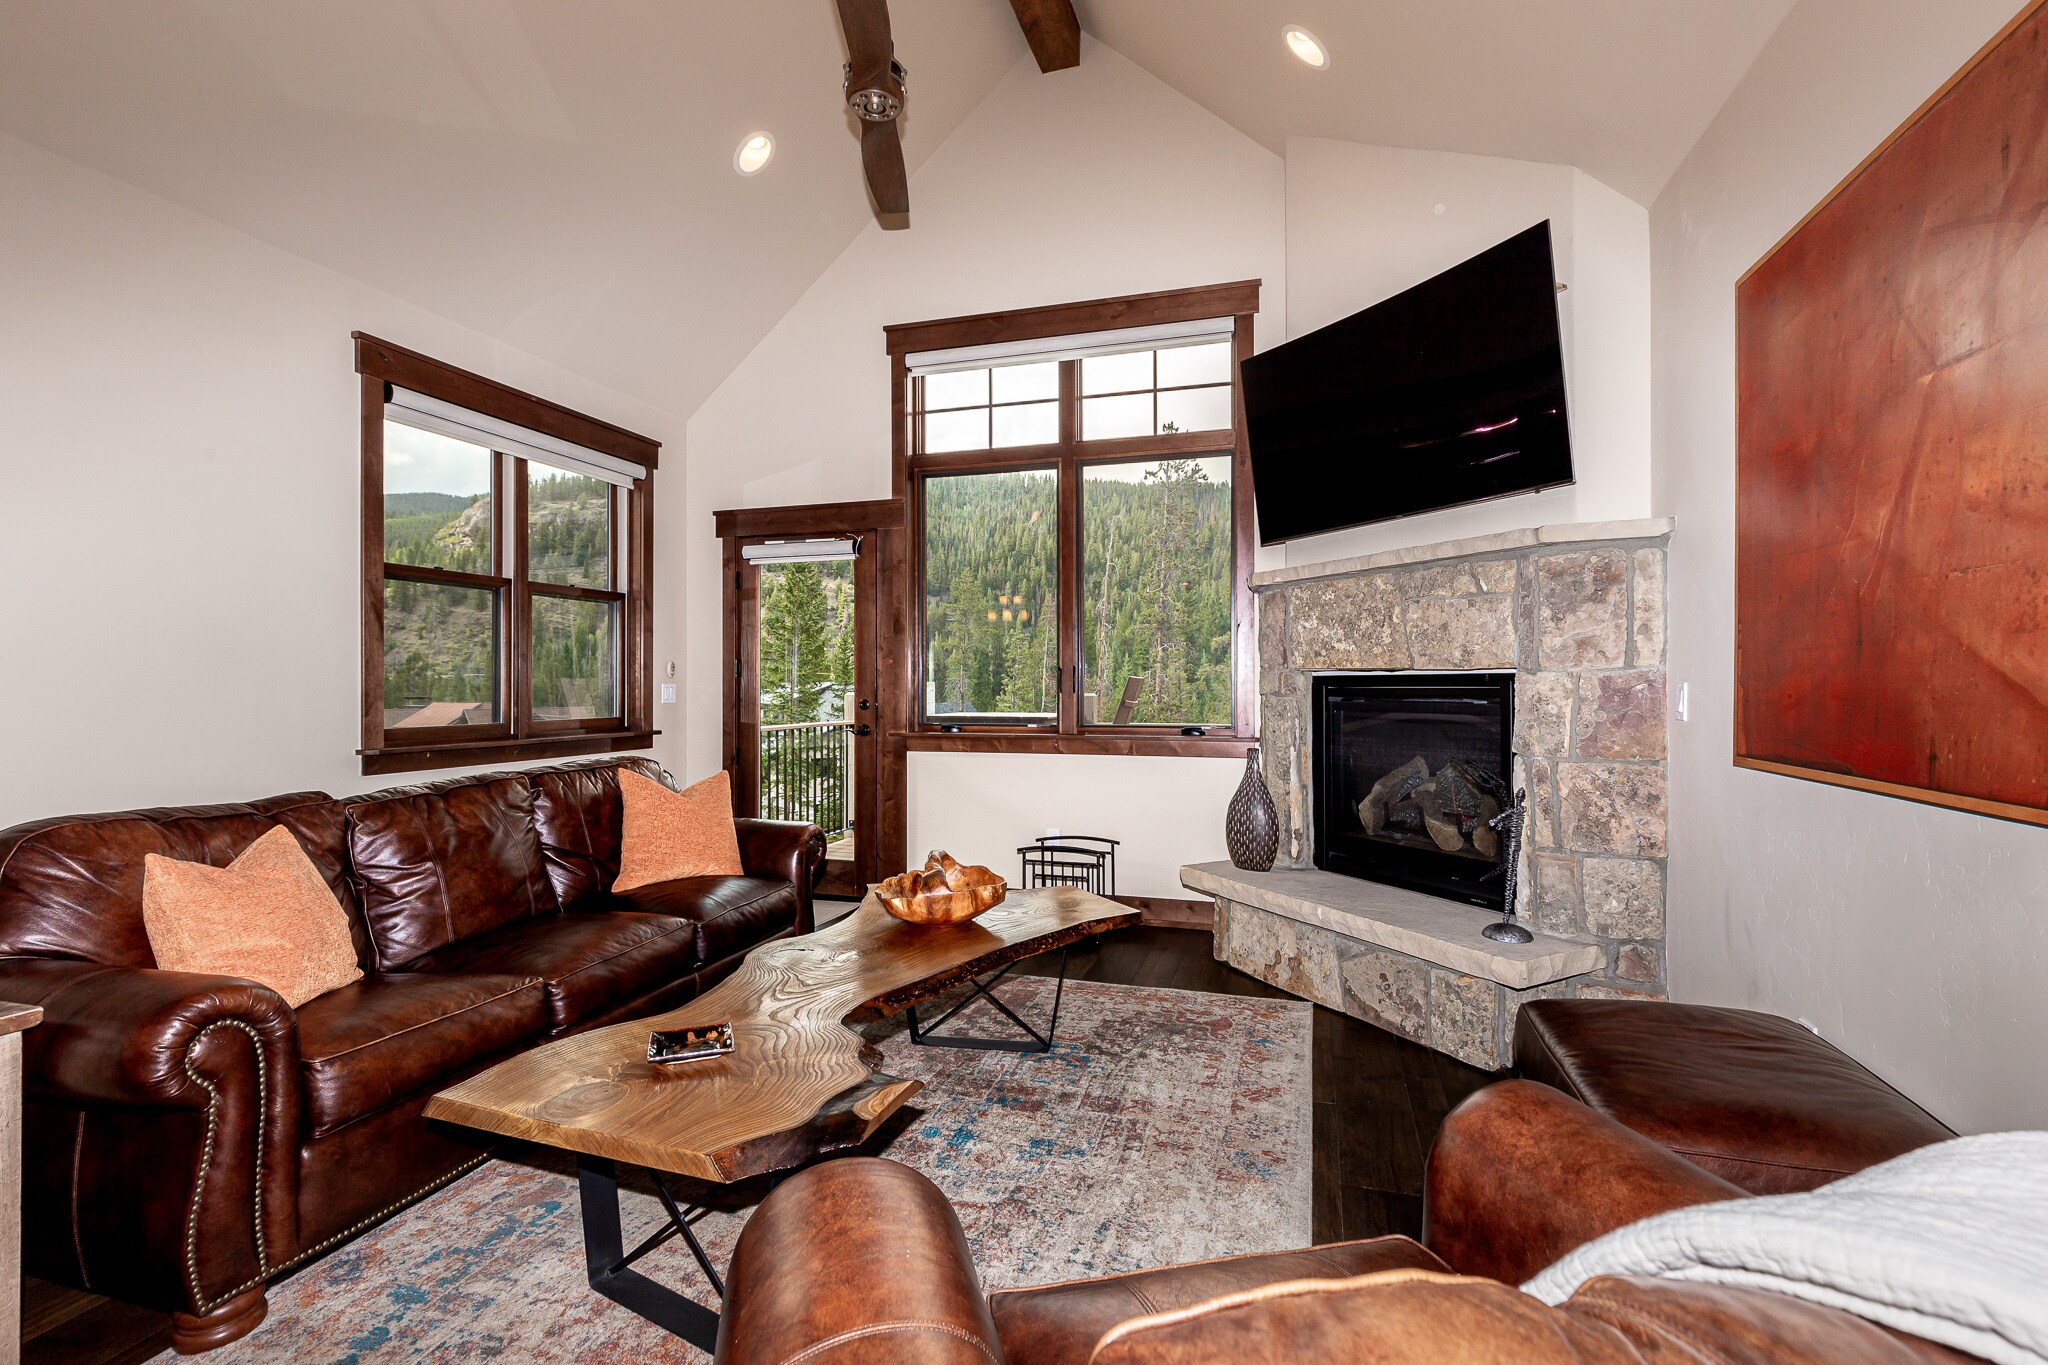 Living Room with gas fireplace, access to the private deck, and spectacular views.